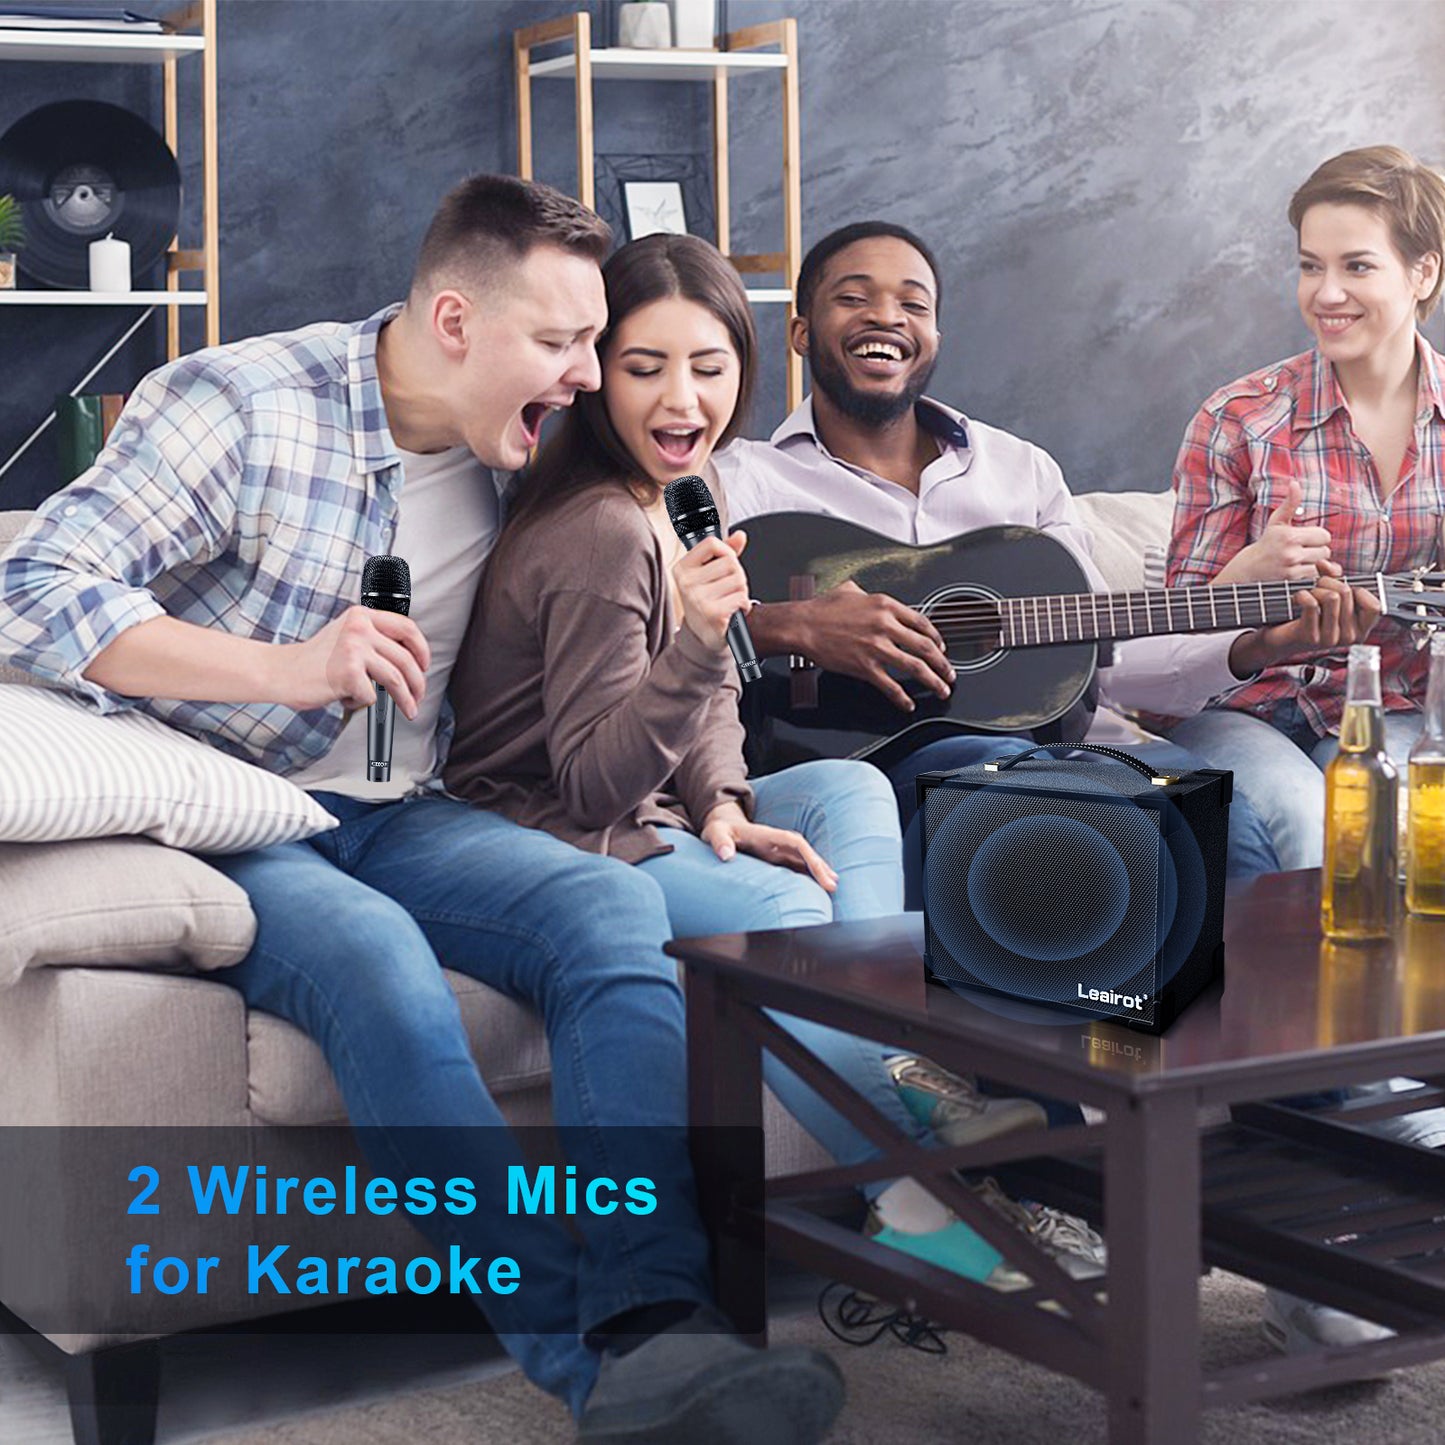 Wooden Karaoke Machine for Adults & Kids with 2 Wireless Microphones, 60W Protable Bluetooth PA Speaker System, Leairot 4000mAh Karaoke Speaker with TWS for Home Party, Indoor Outdoor Singing Machine